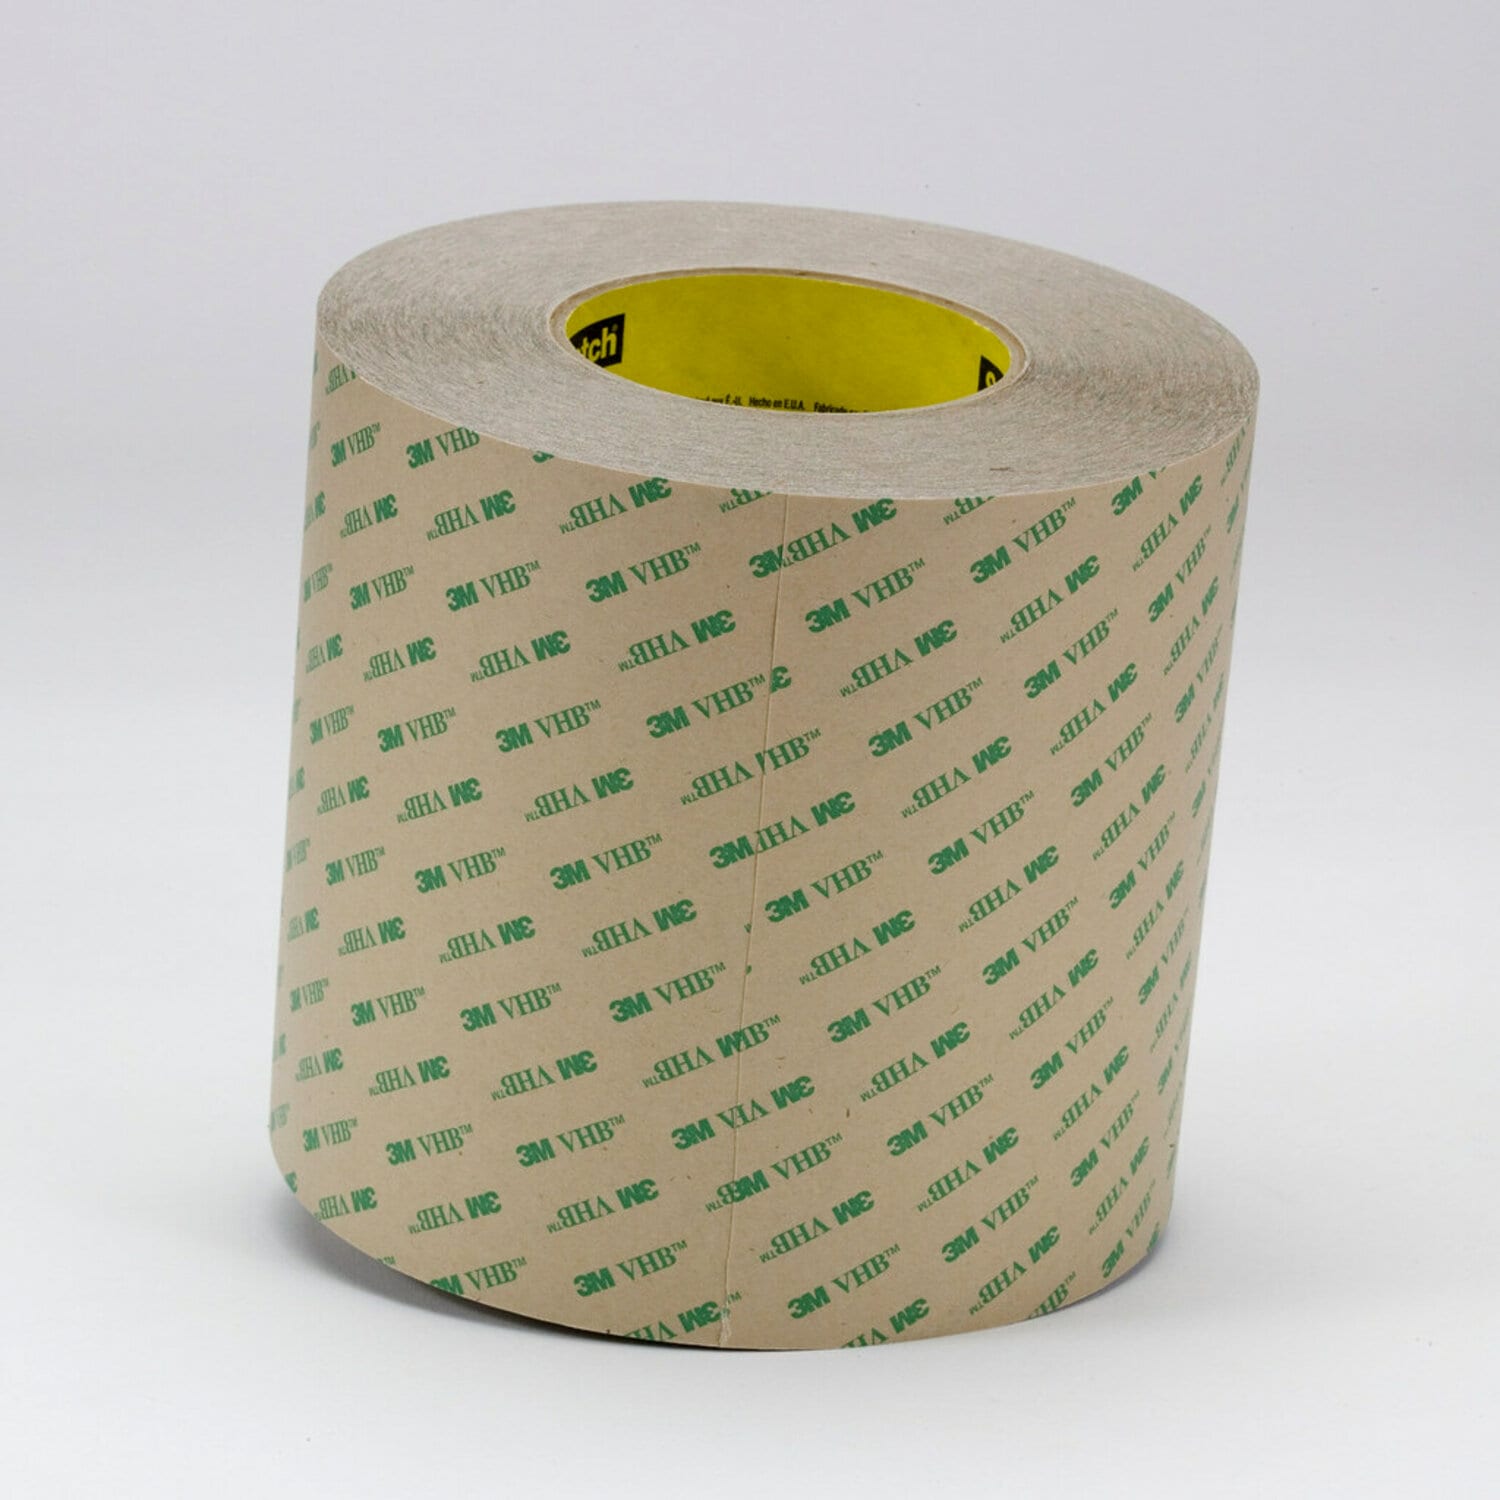 7100012995 - 3M VHB Adhesive Transfer Tape F9460PC, Clear, 2 mil, Roll, Config